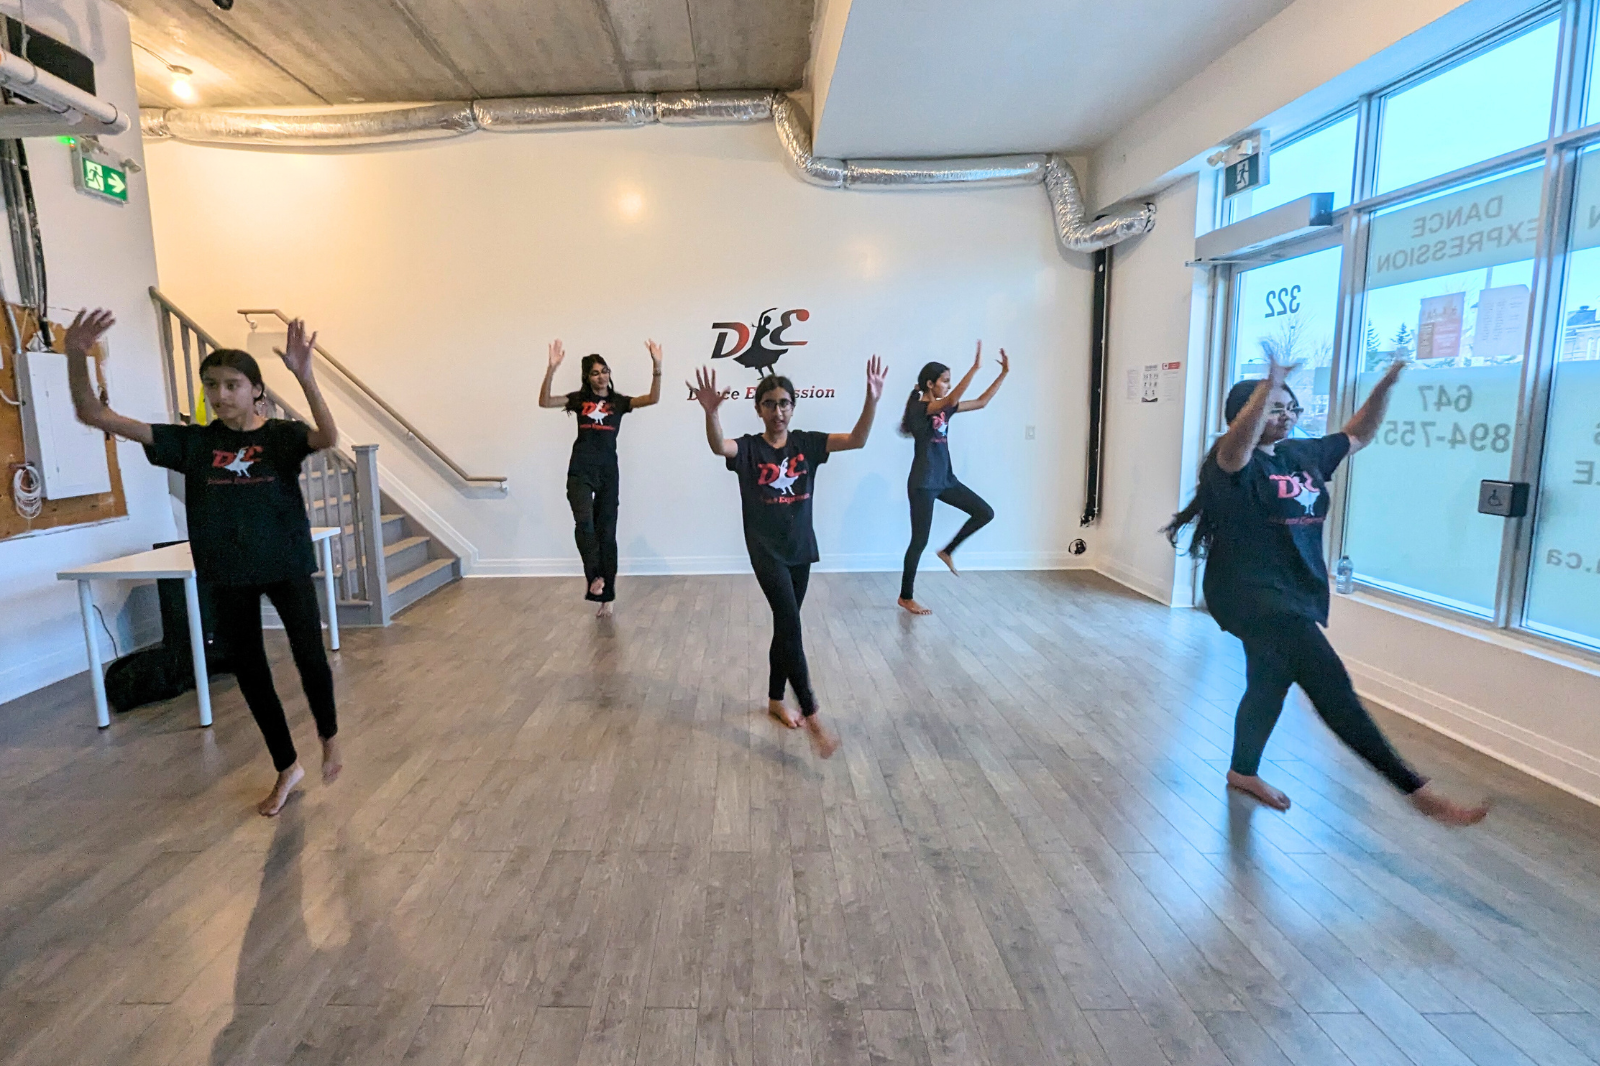 Tweens and teens participating in a Bhangra class at Dance Expression Studio, performing a dance sequence in unison while wearing the studio's DE logo t-shirts.